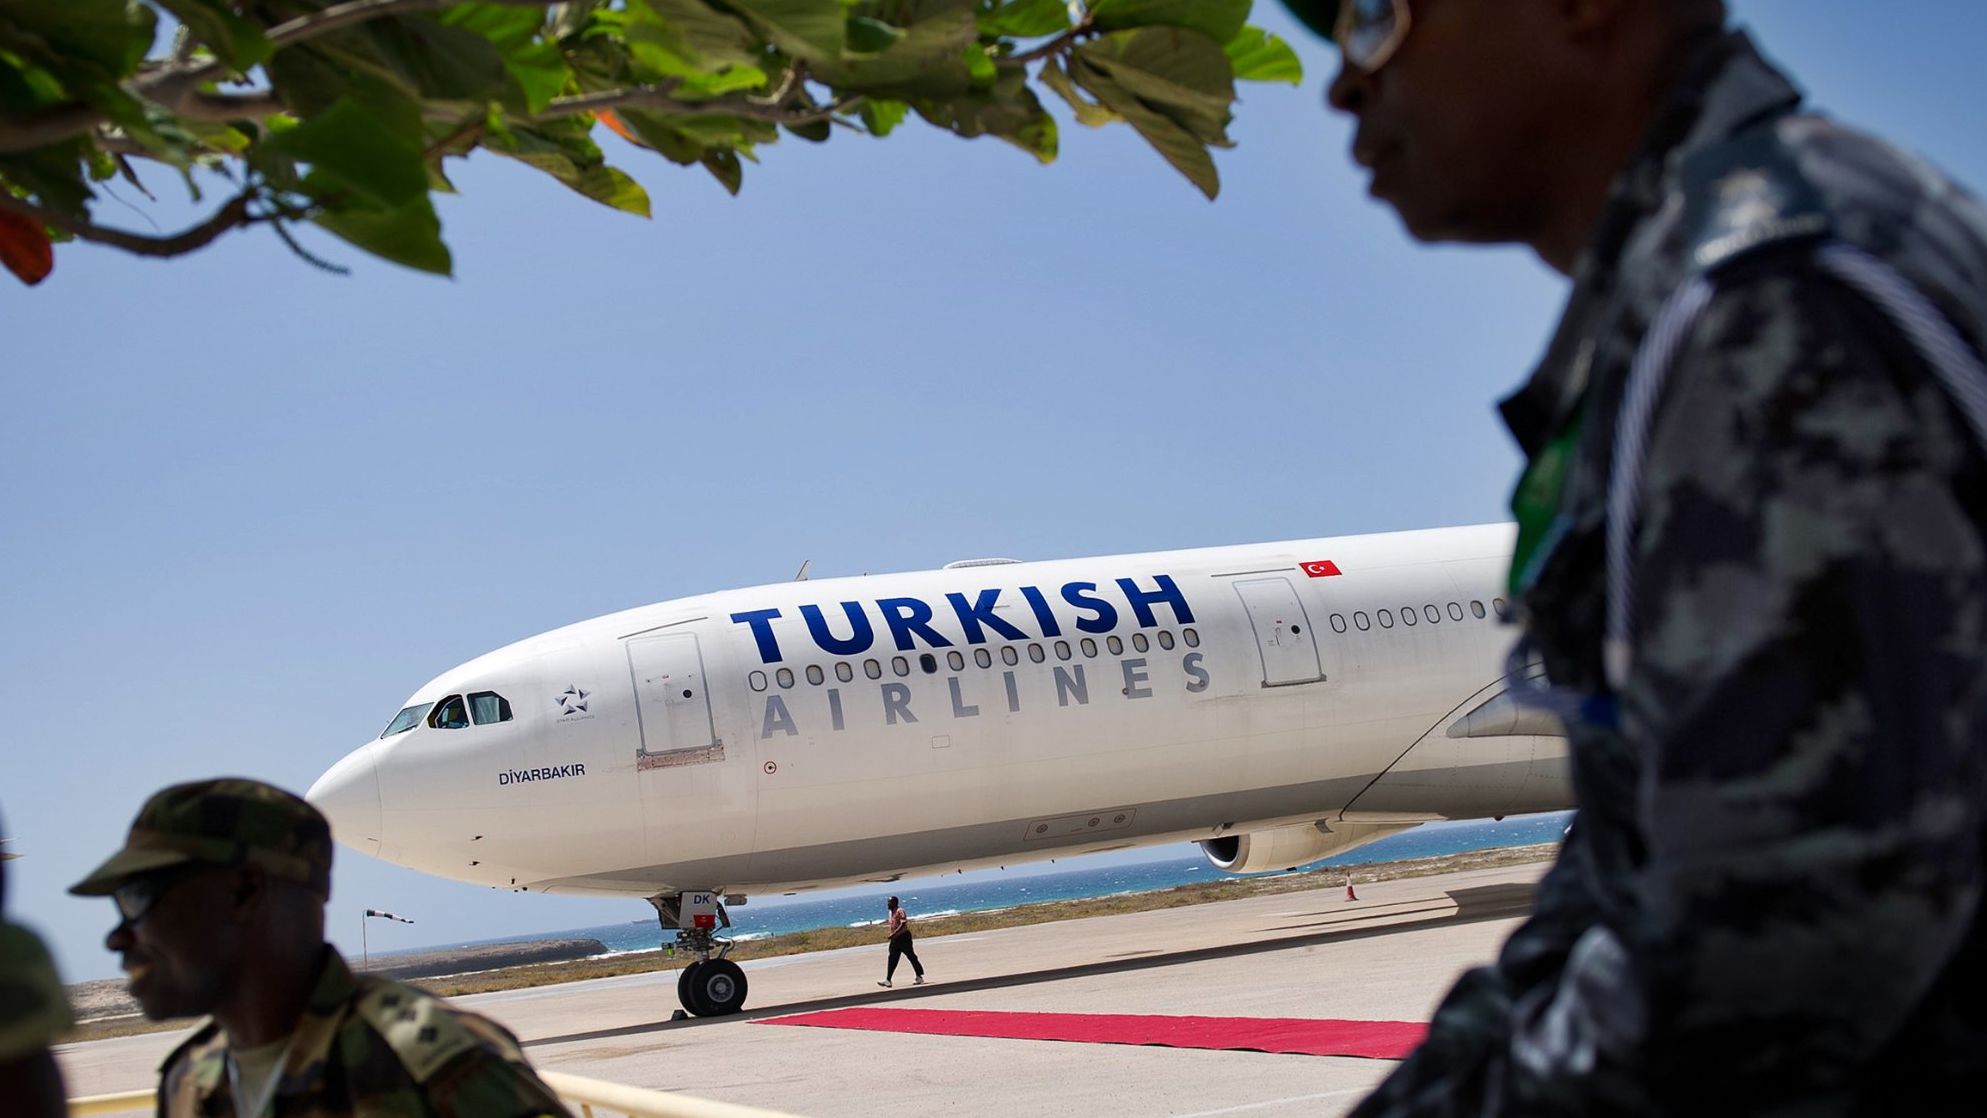 Despite being classified as a hostile destination, many carriers, like Turkish Airlines, are flying to Somalia's capital, Mogadishu.